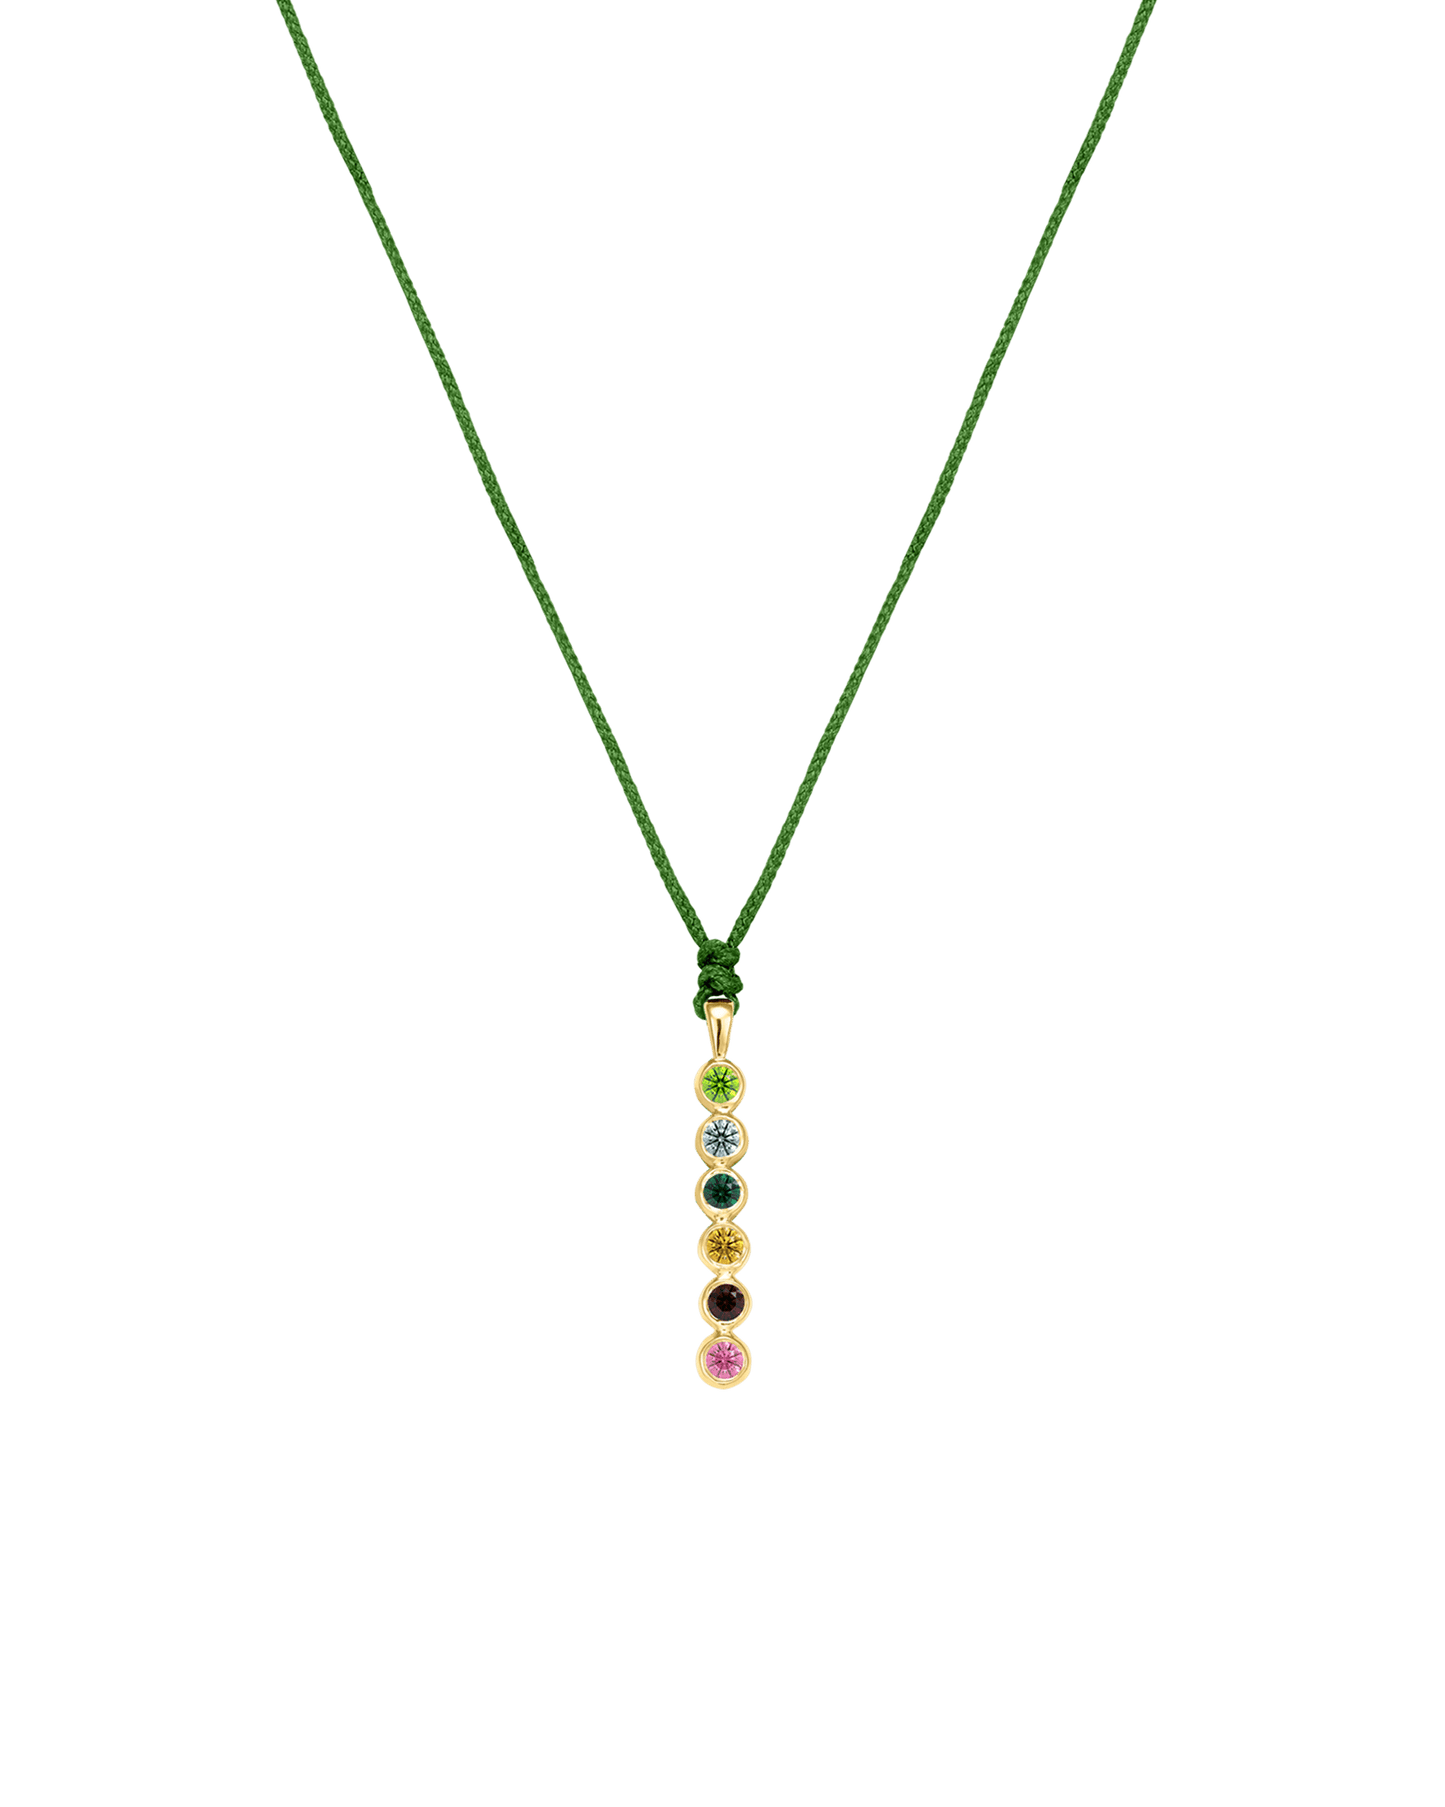 The Birthstones Bar Necklace - 14K Yellow Gold Necklaces 14K Solid Gold Mint 2 